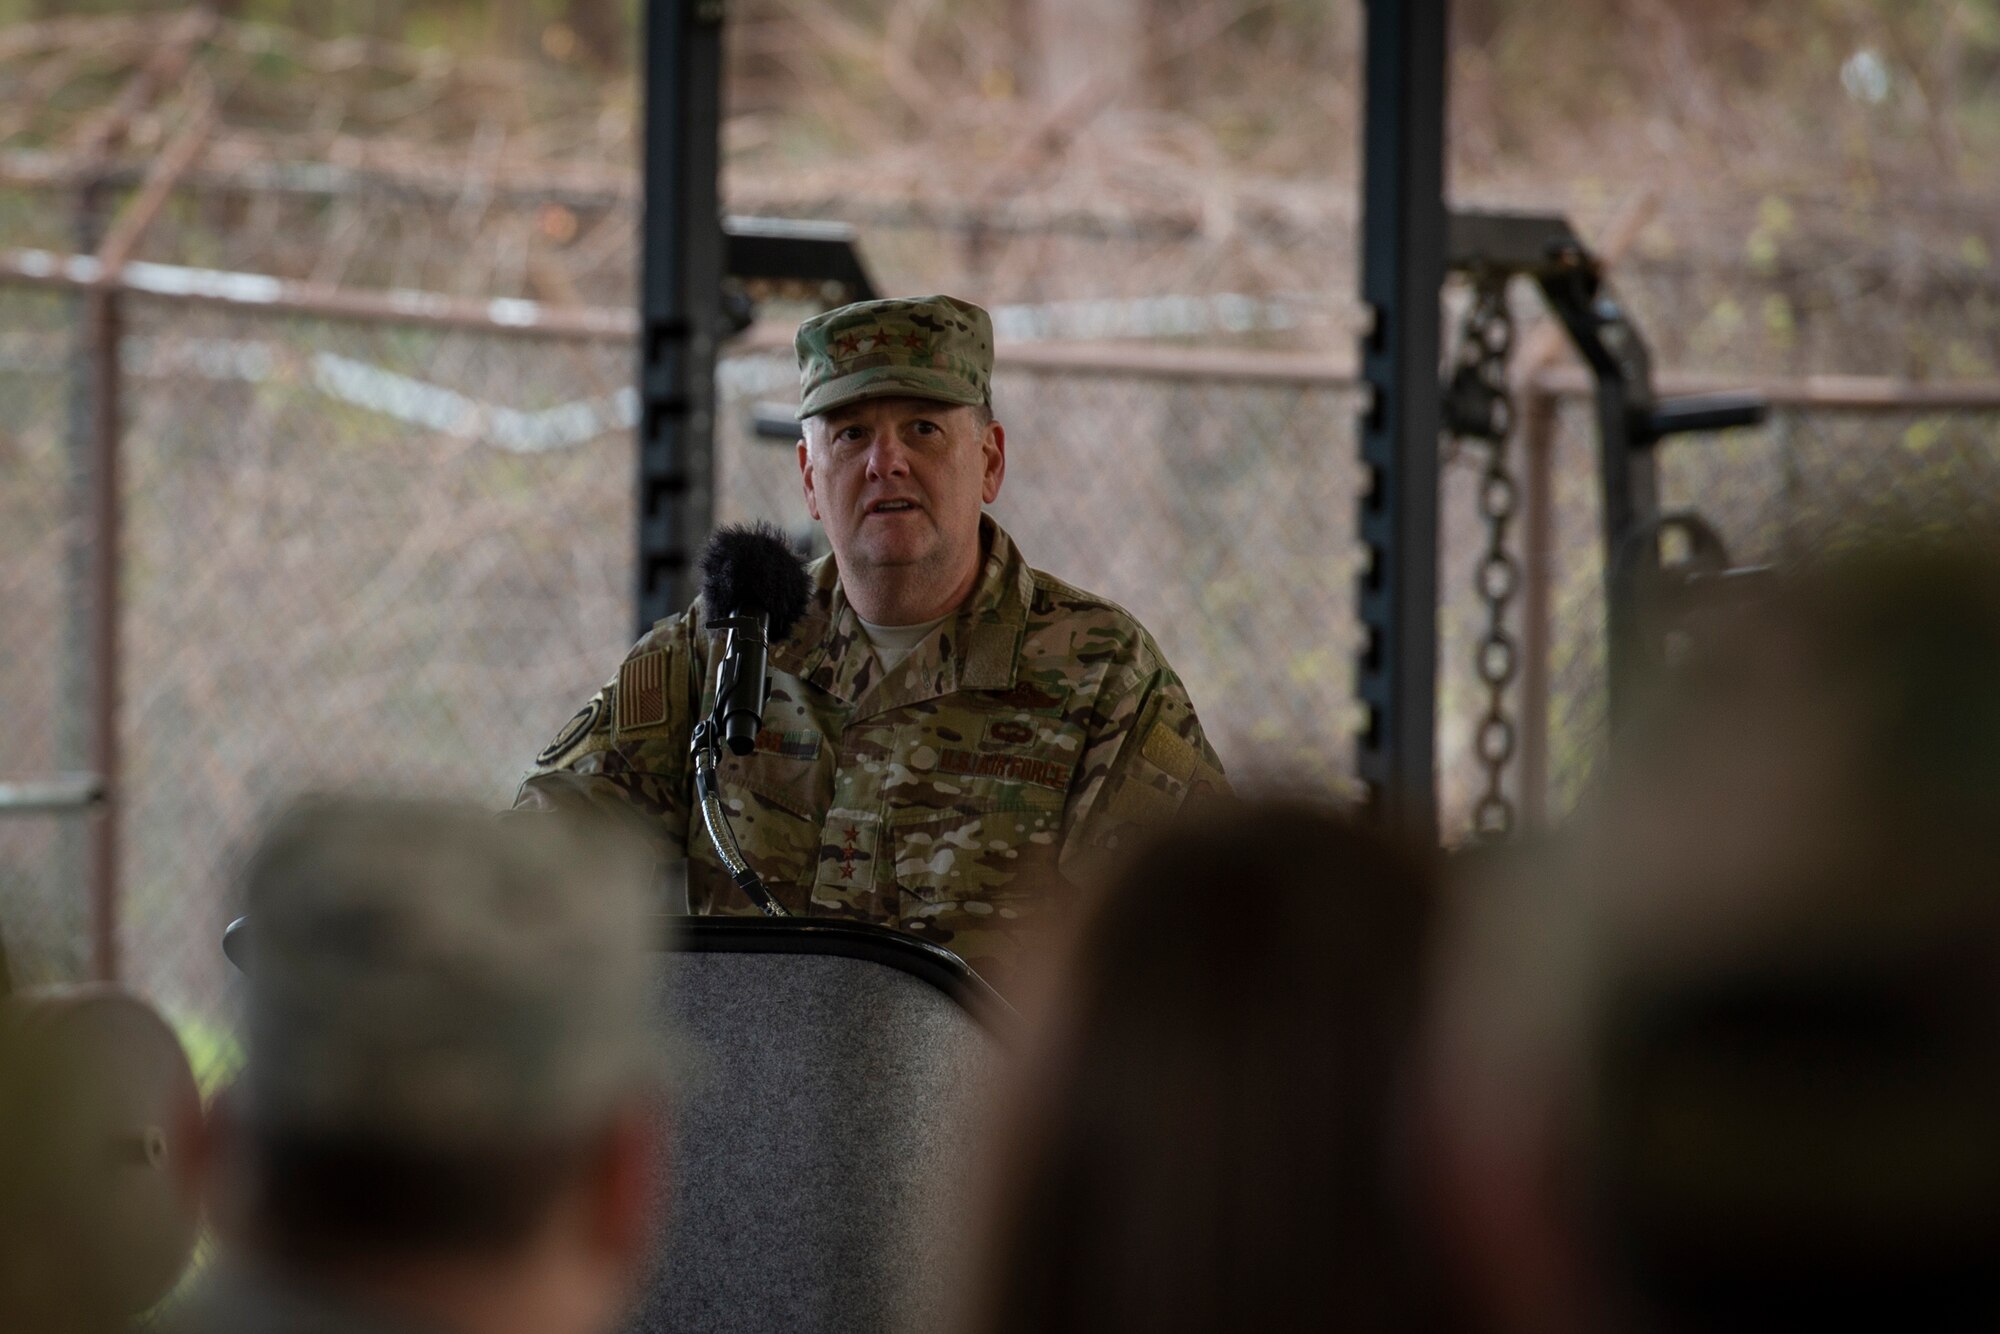 U.S. Air Force Lt. Gen. Brad Webb, commander of Air Force Special Operations Command, gives remarks during the Special Tactics Ruck March Memorial Ceremony at Hurlburt Field, Florida, March 4, 2018.